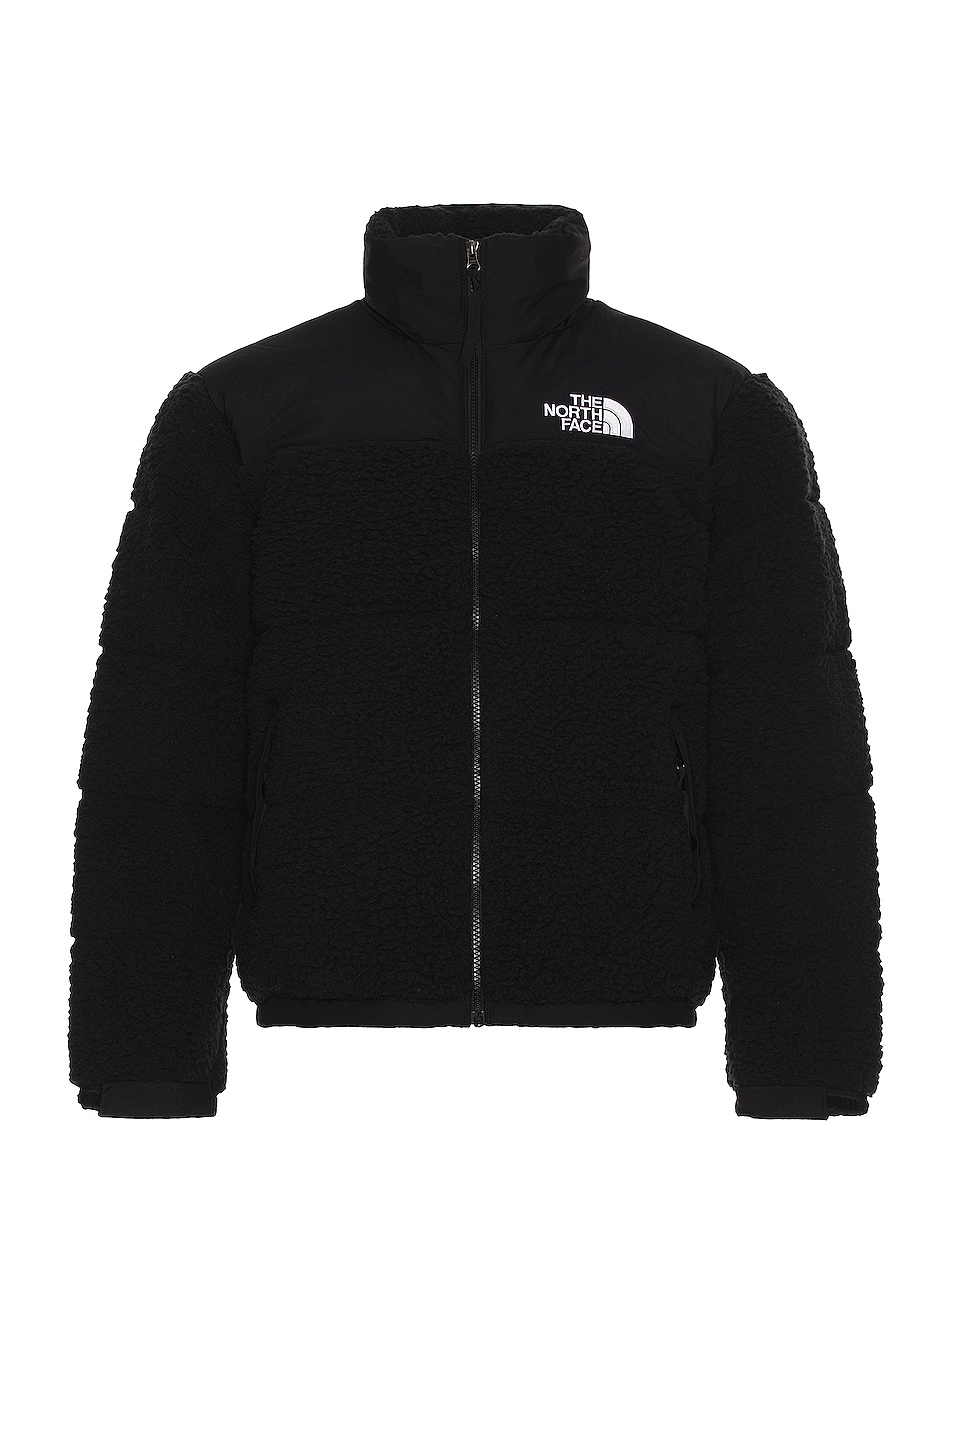 The North Face Sherpa Nuptse Jacket in TNF Black | FWRD